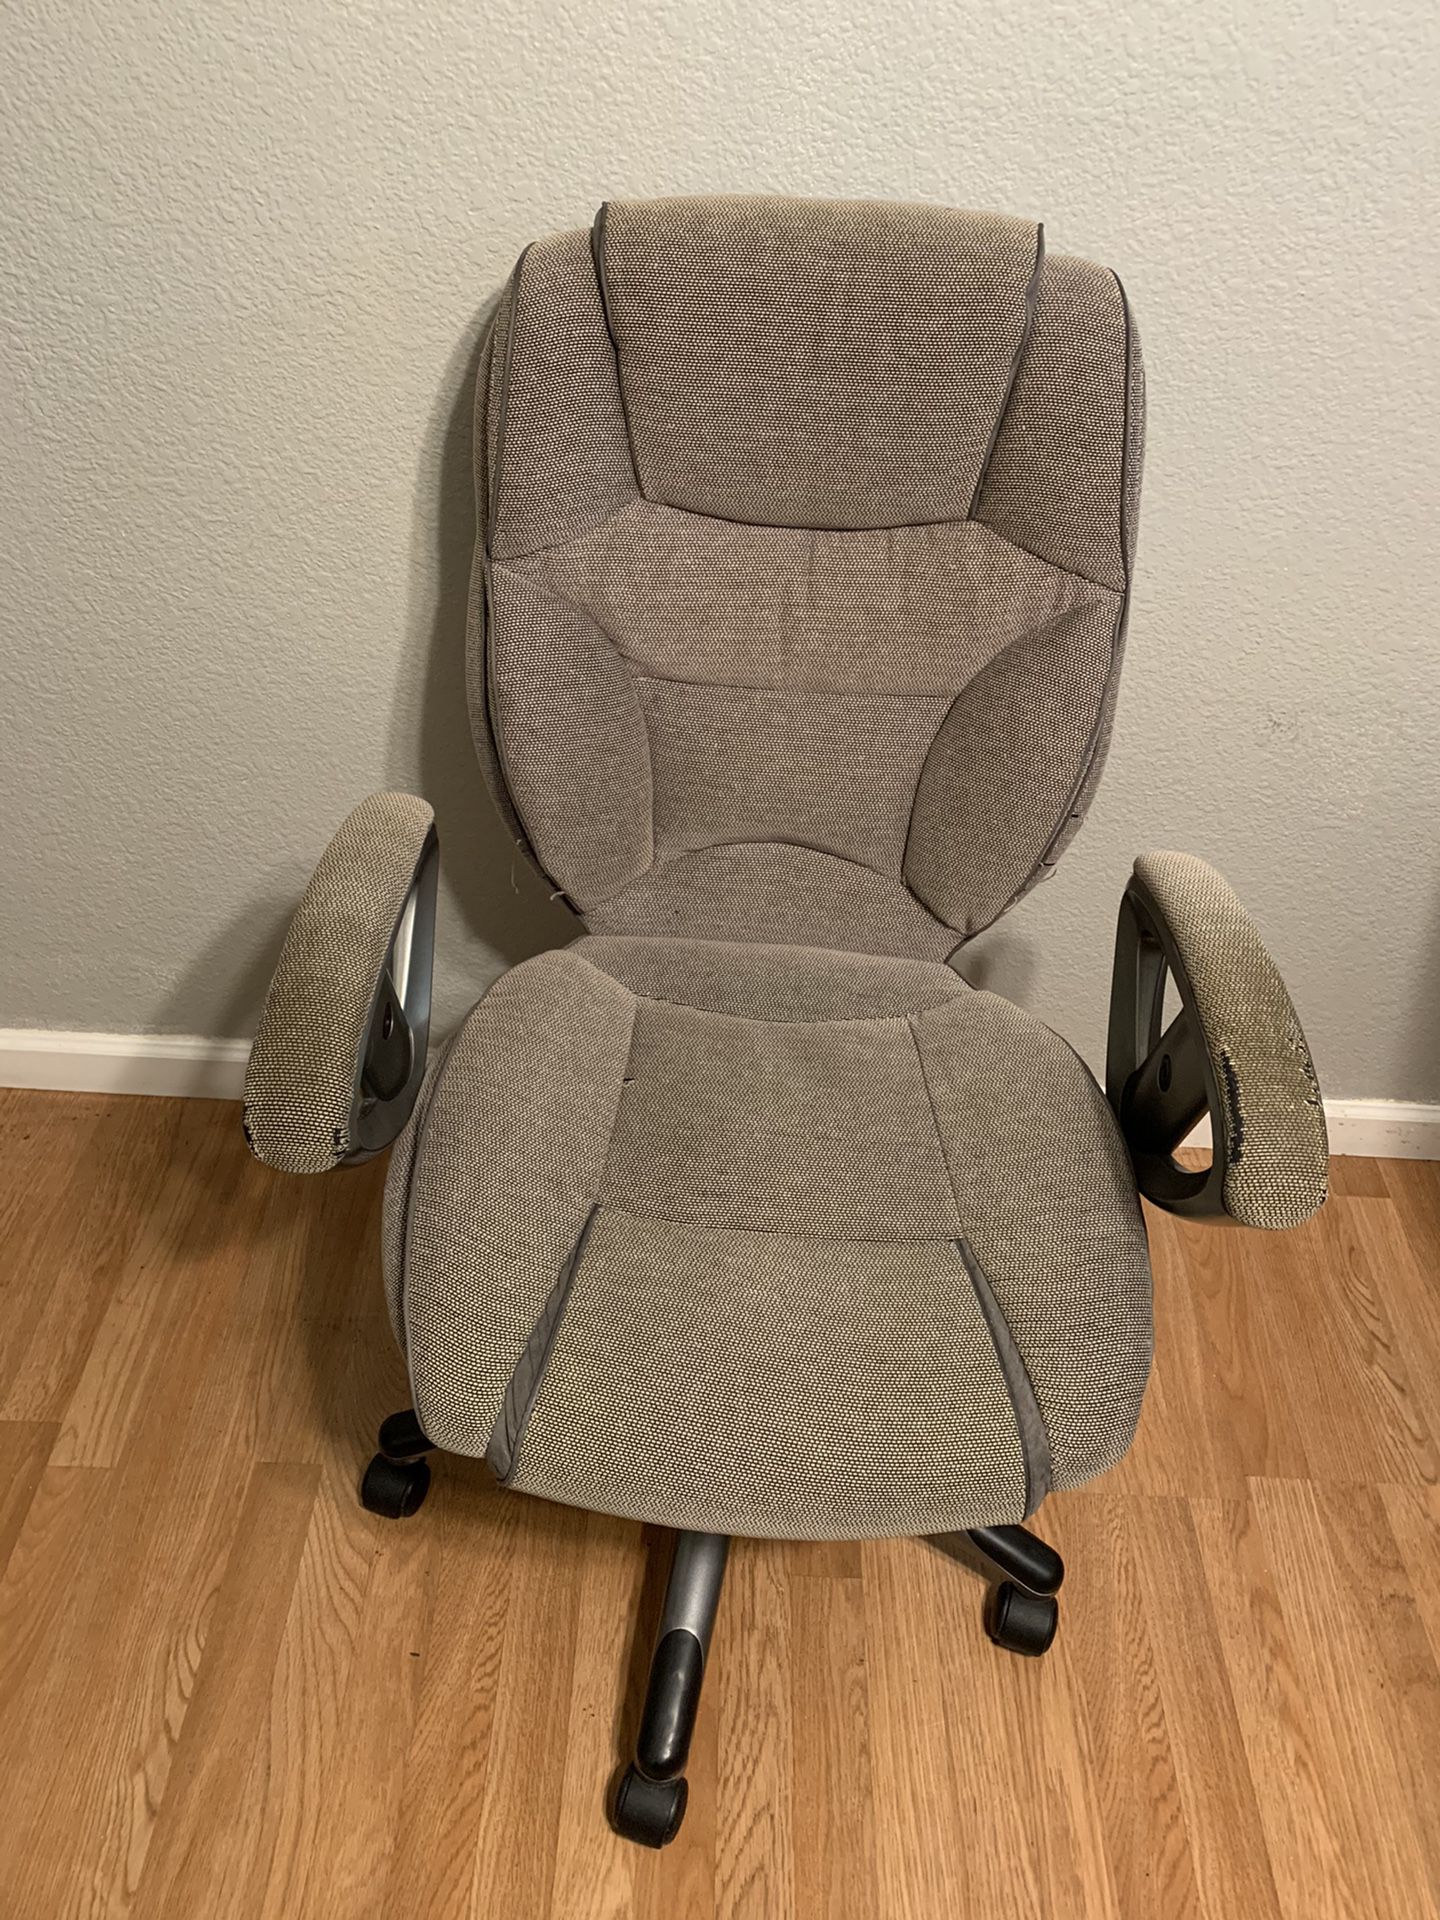 Constable rolling gray office chair 35 you pick up